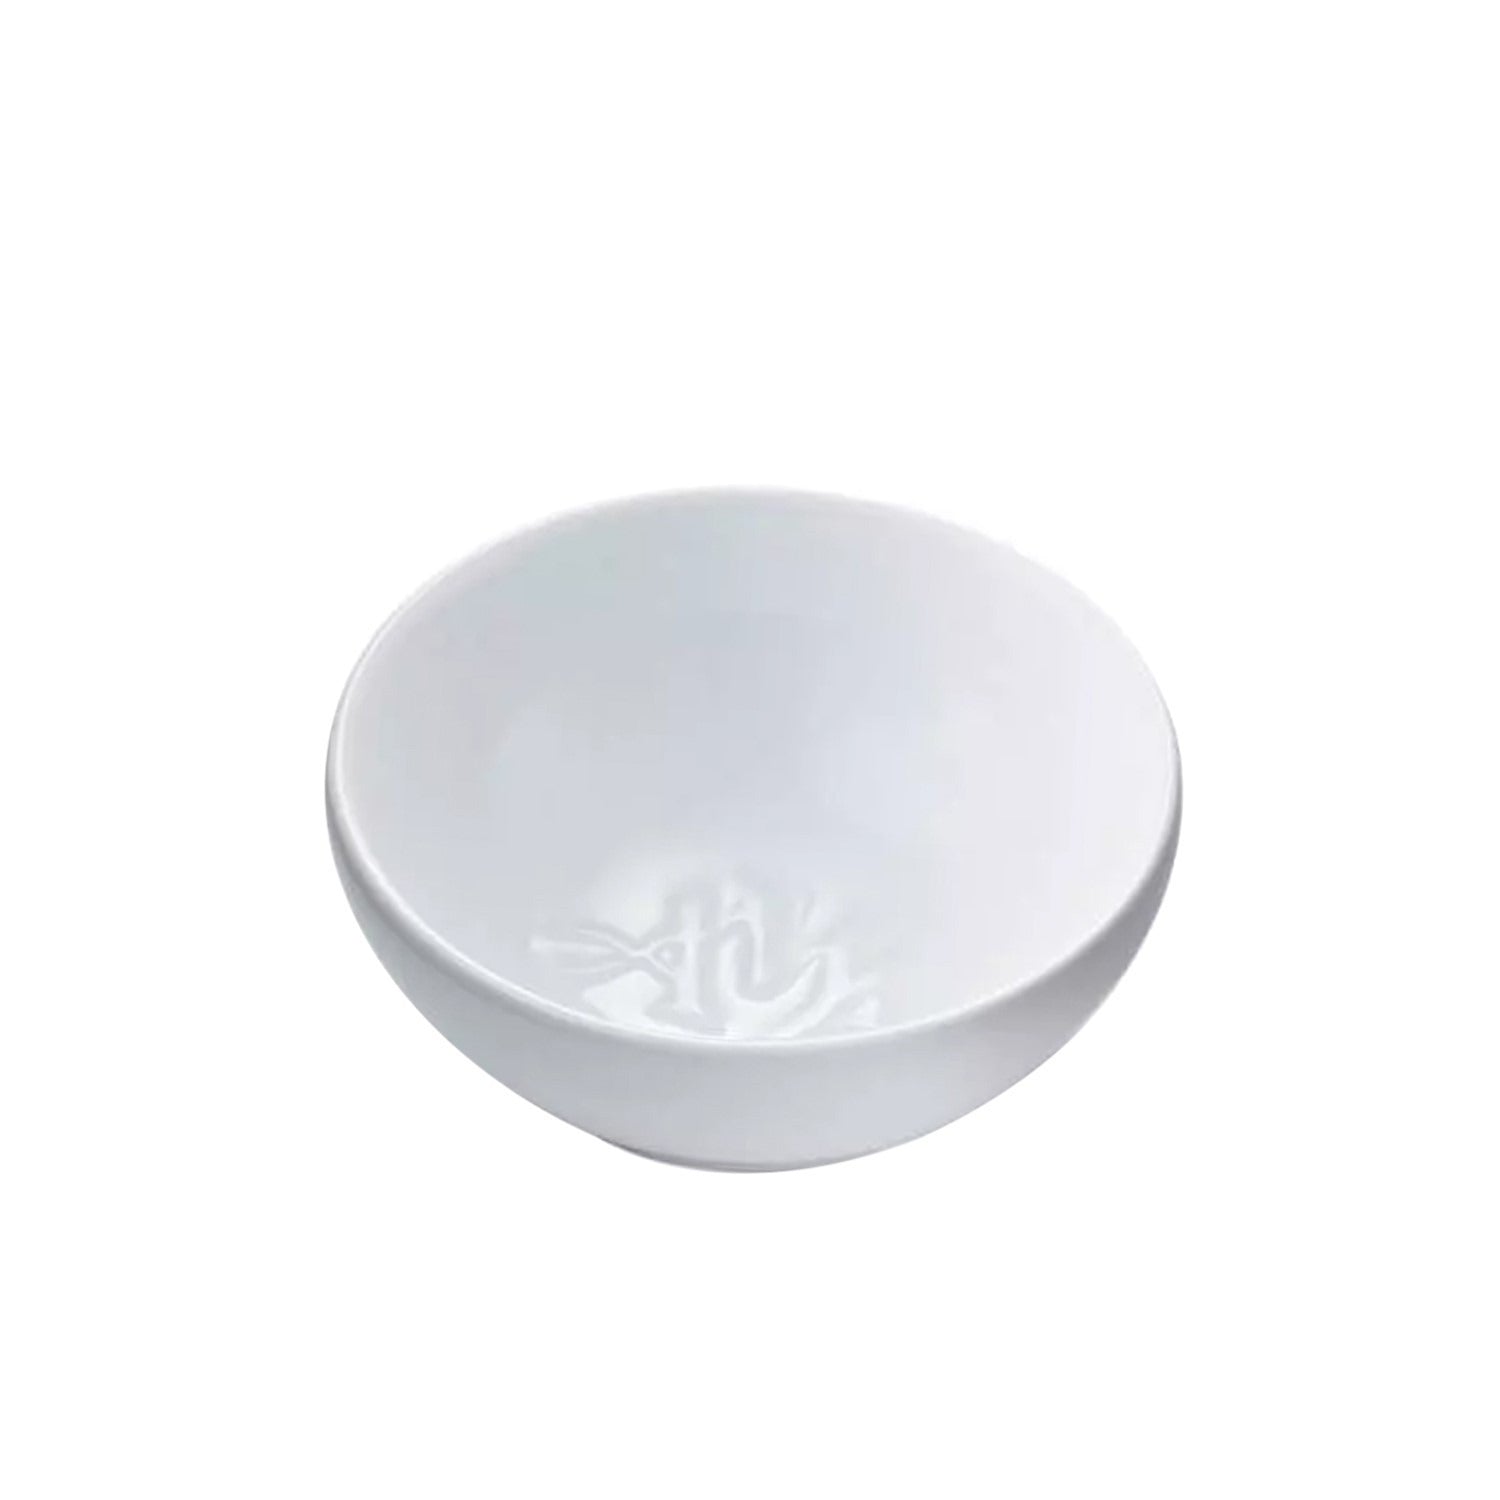 View Ava May Oval Burner Bowl White information